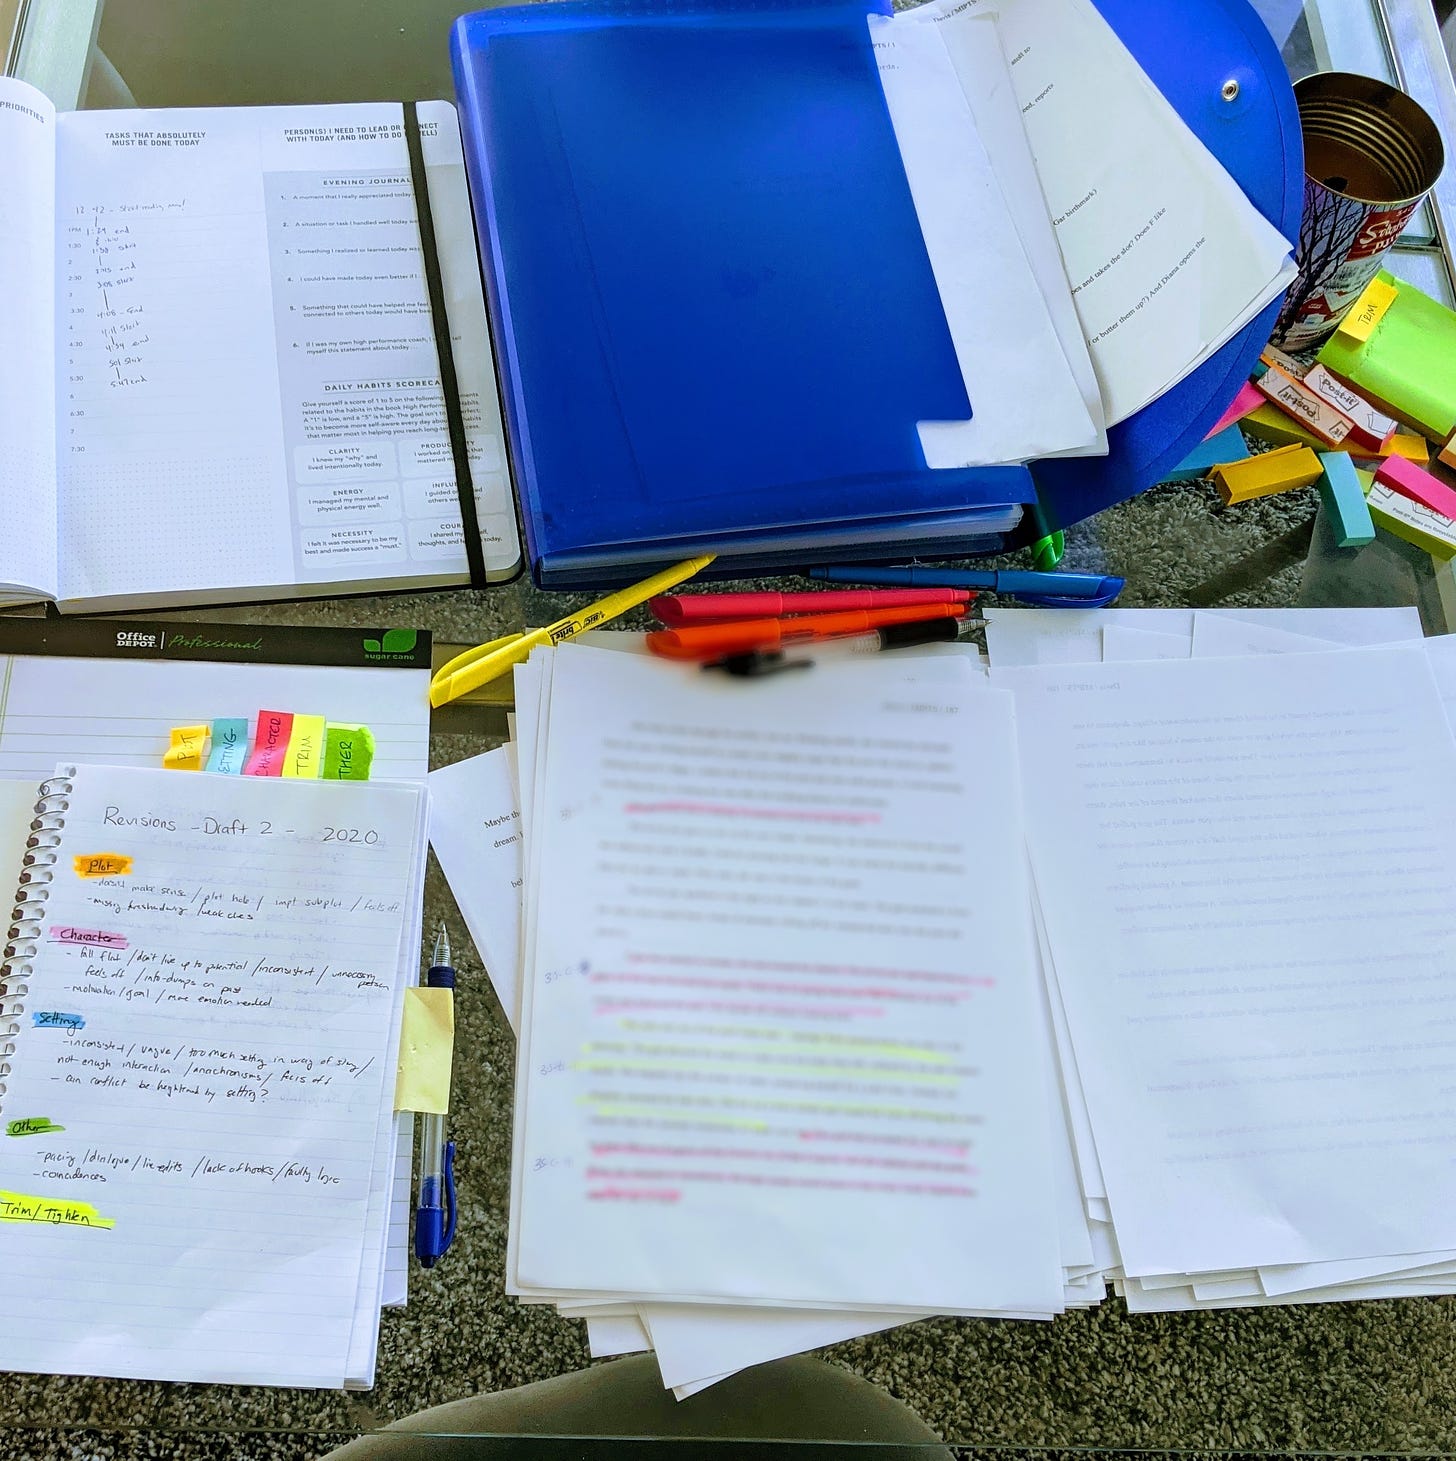 journals and notes and sticky notes scattered across a glass table